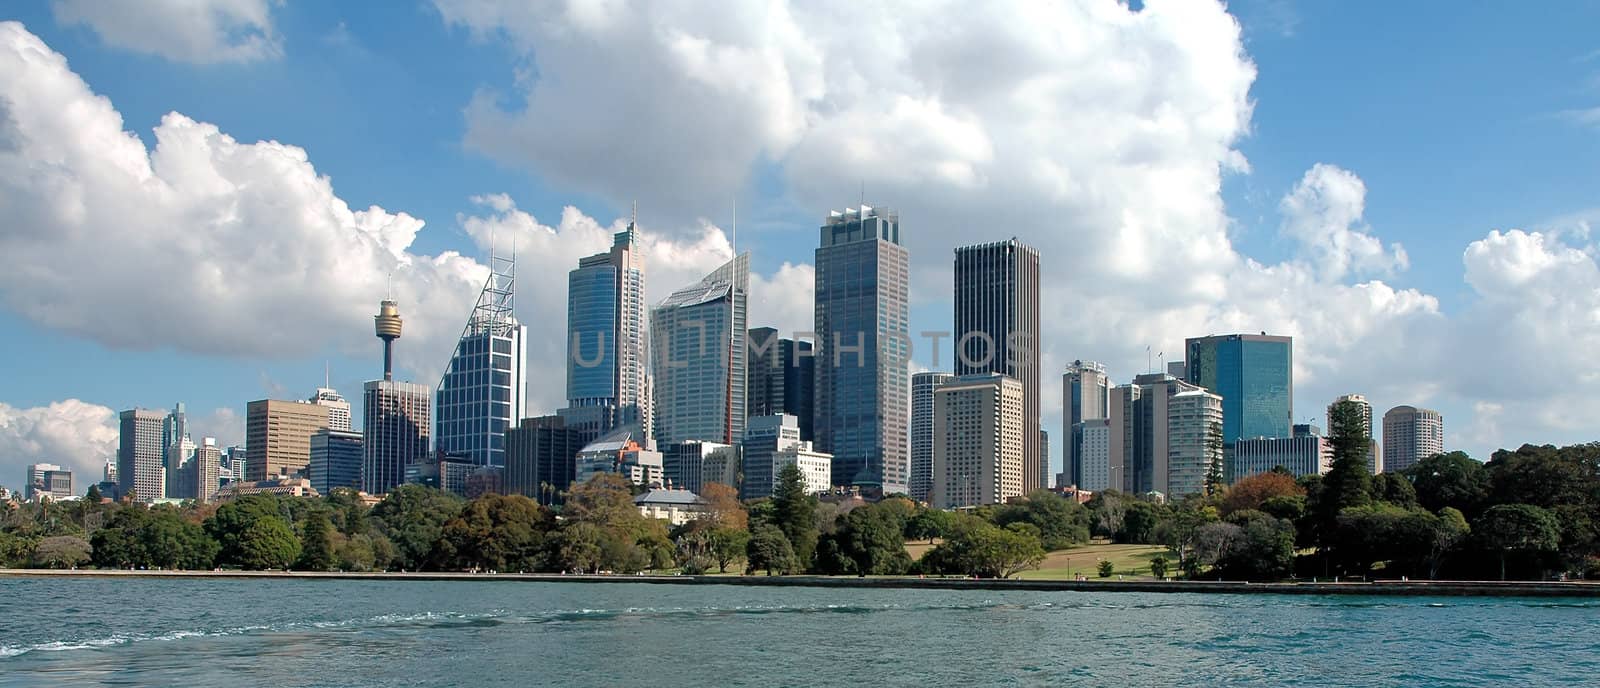 sydney cbd panorama, royal botanic gardens in foreground, photo taken from a ferry